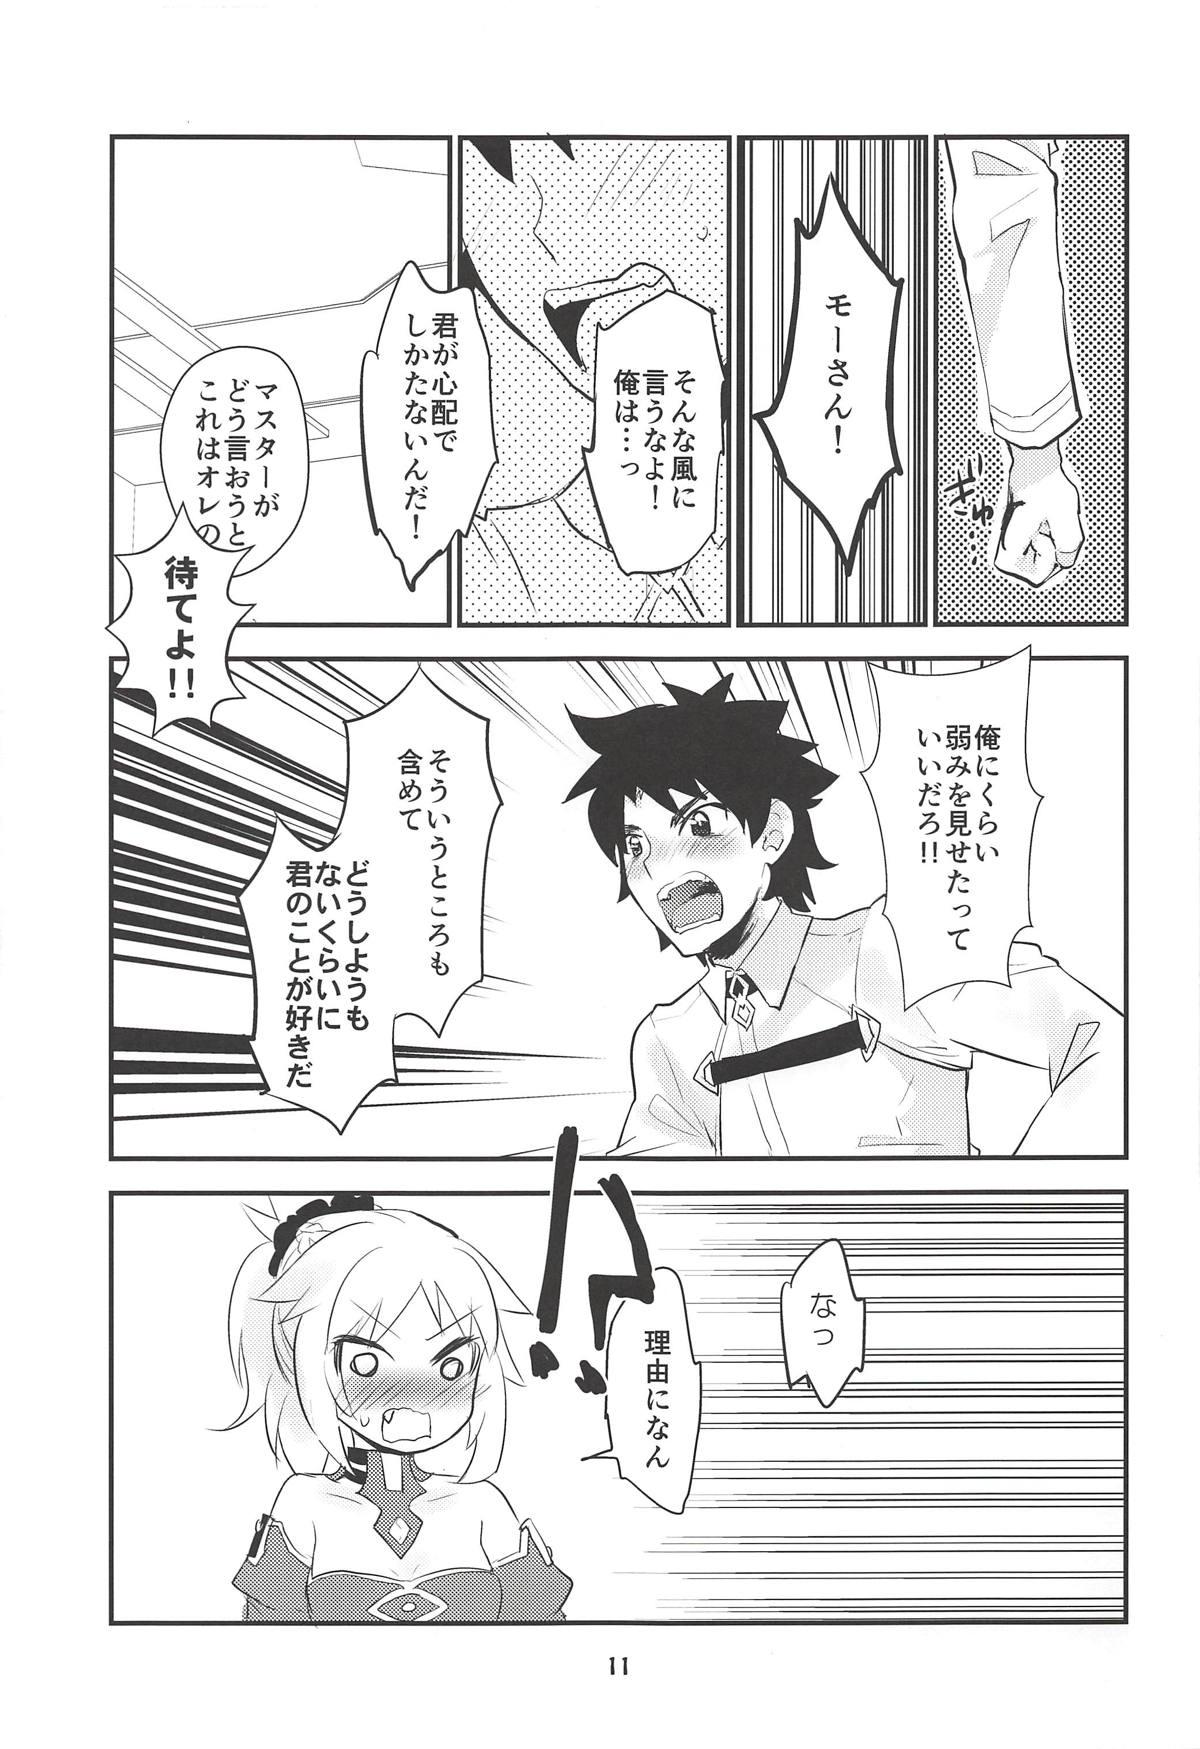 Dildo Dreaming - Fate grand order Home - Page 10